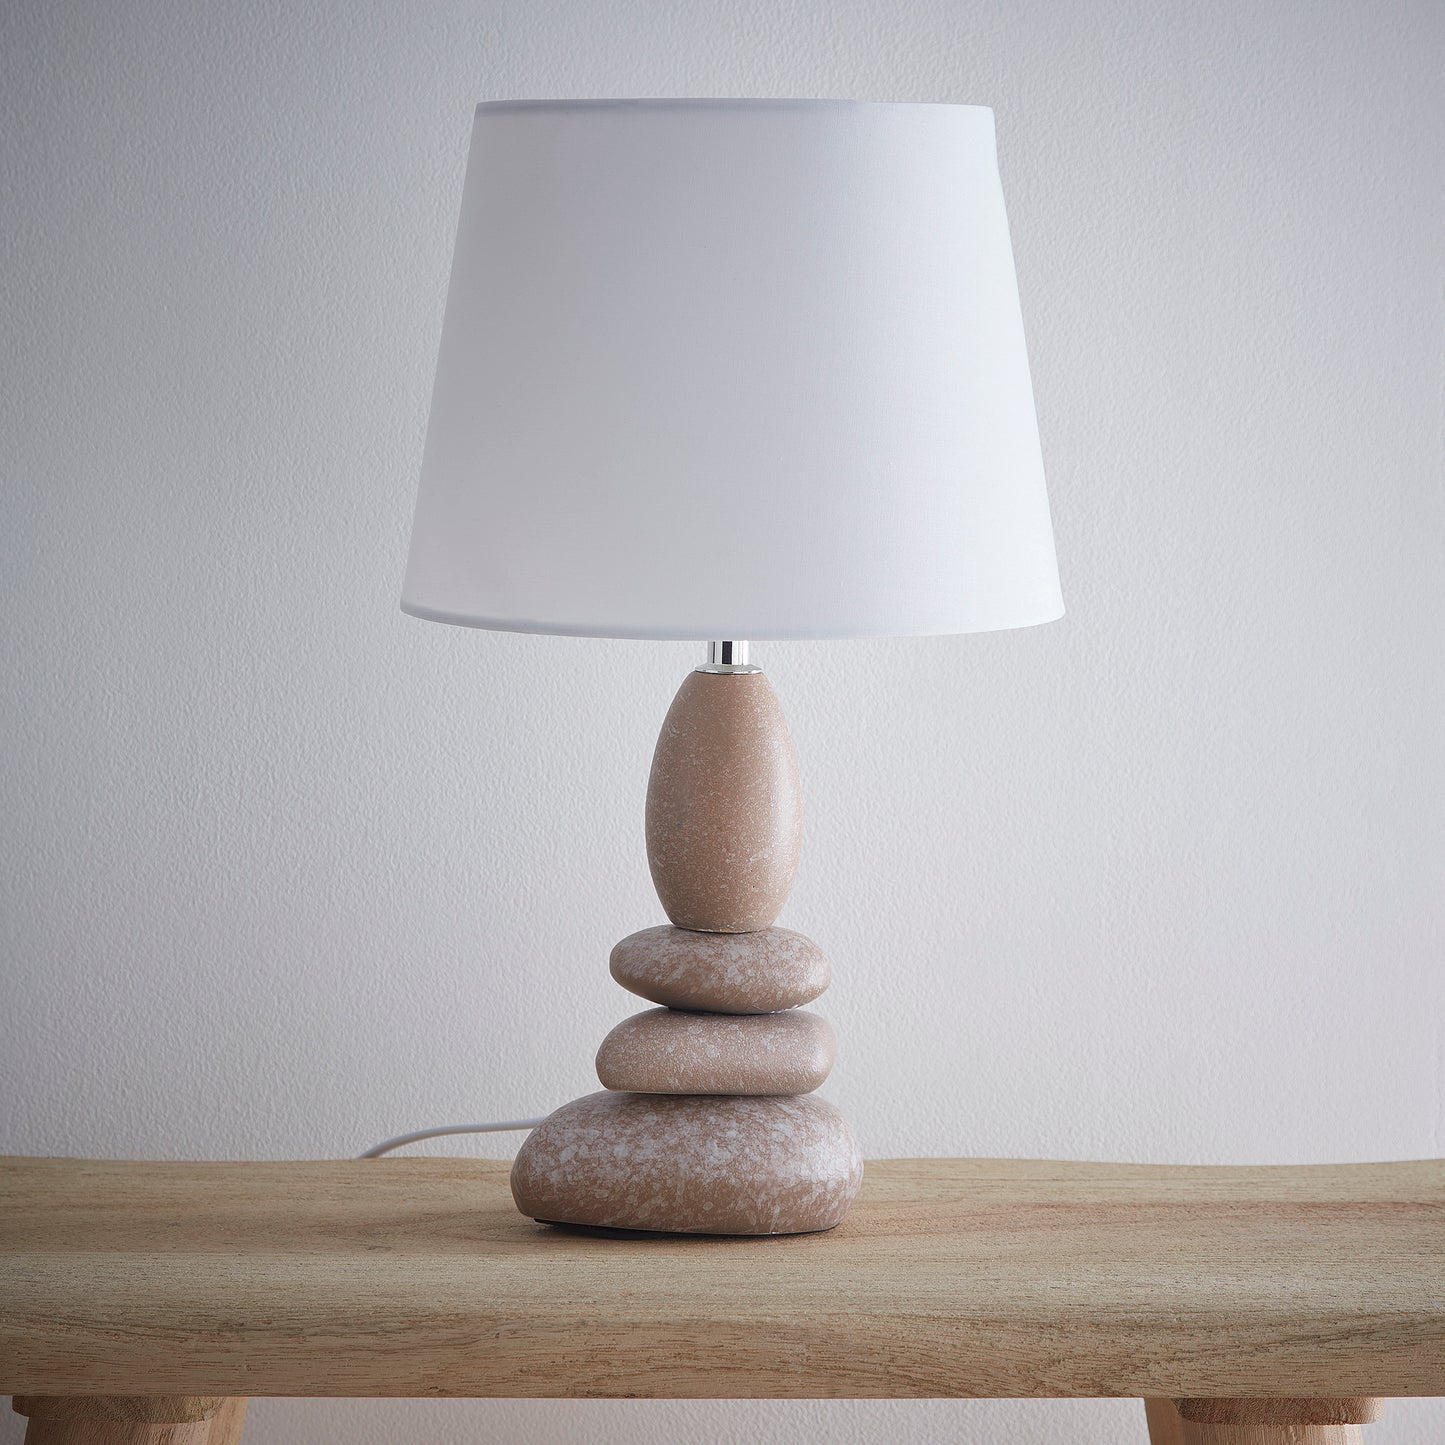 Kai Ceramic Table lamp with a Pebbles shade stand and a White Cotton Lampshade